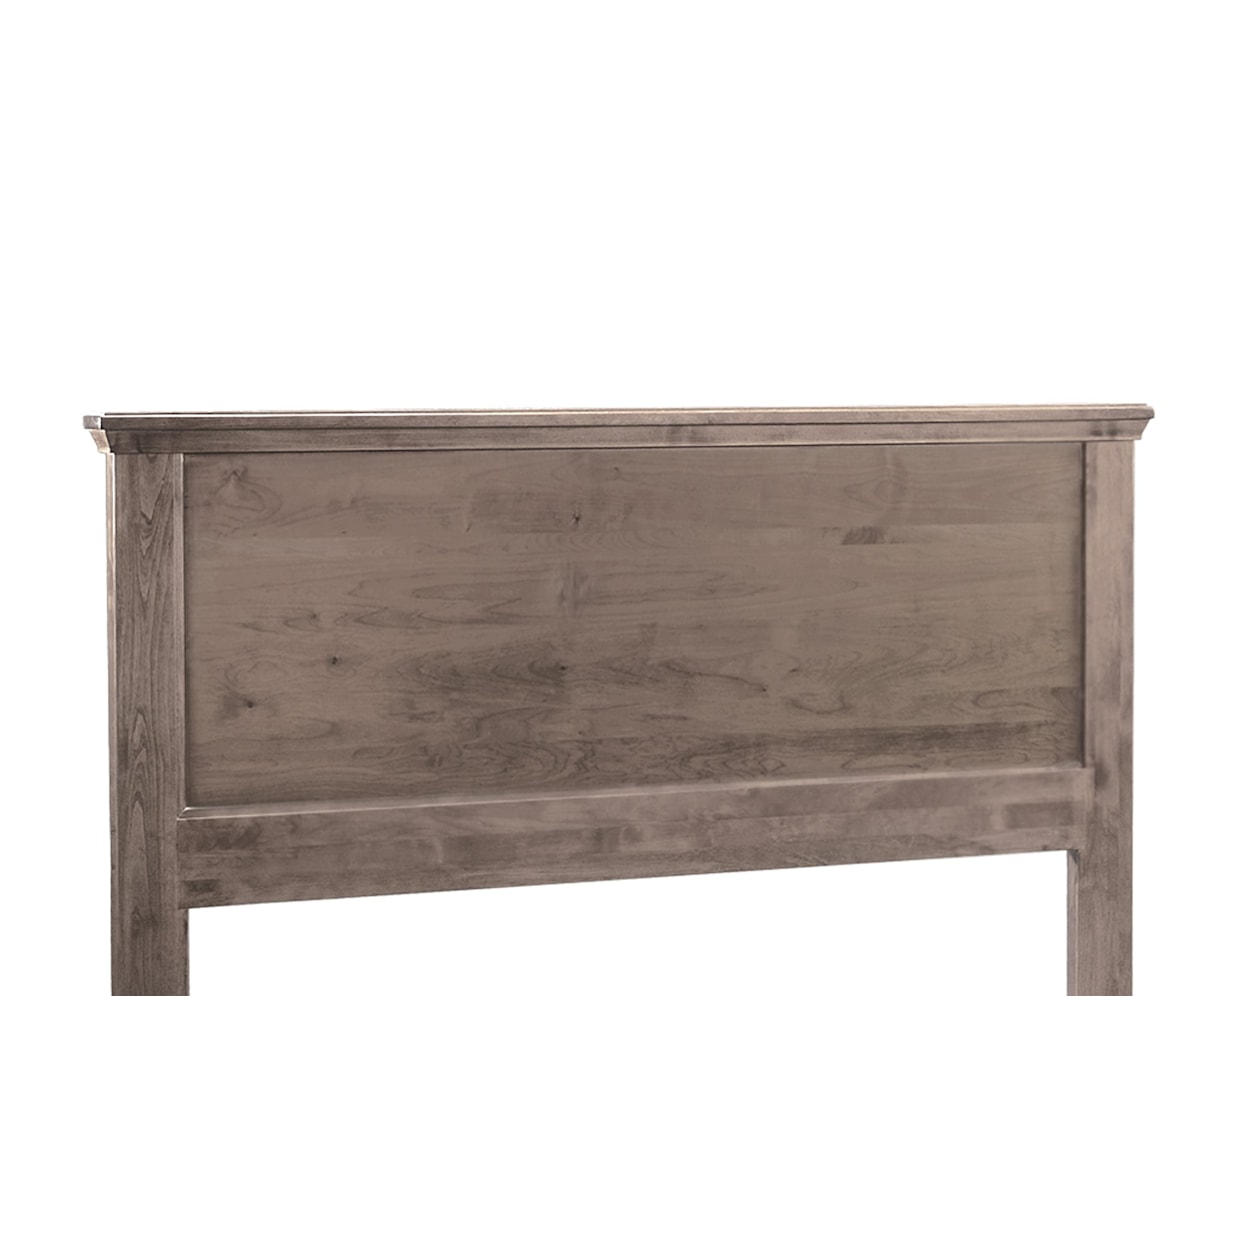 Archbold Furniture Heritage Full Plank Headboard Only